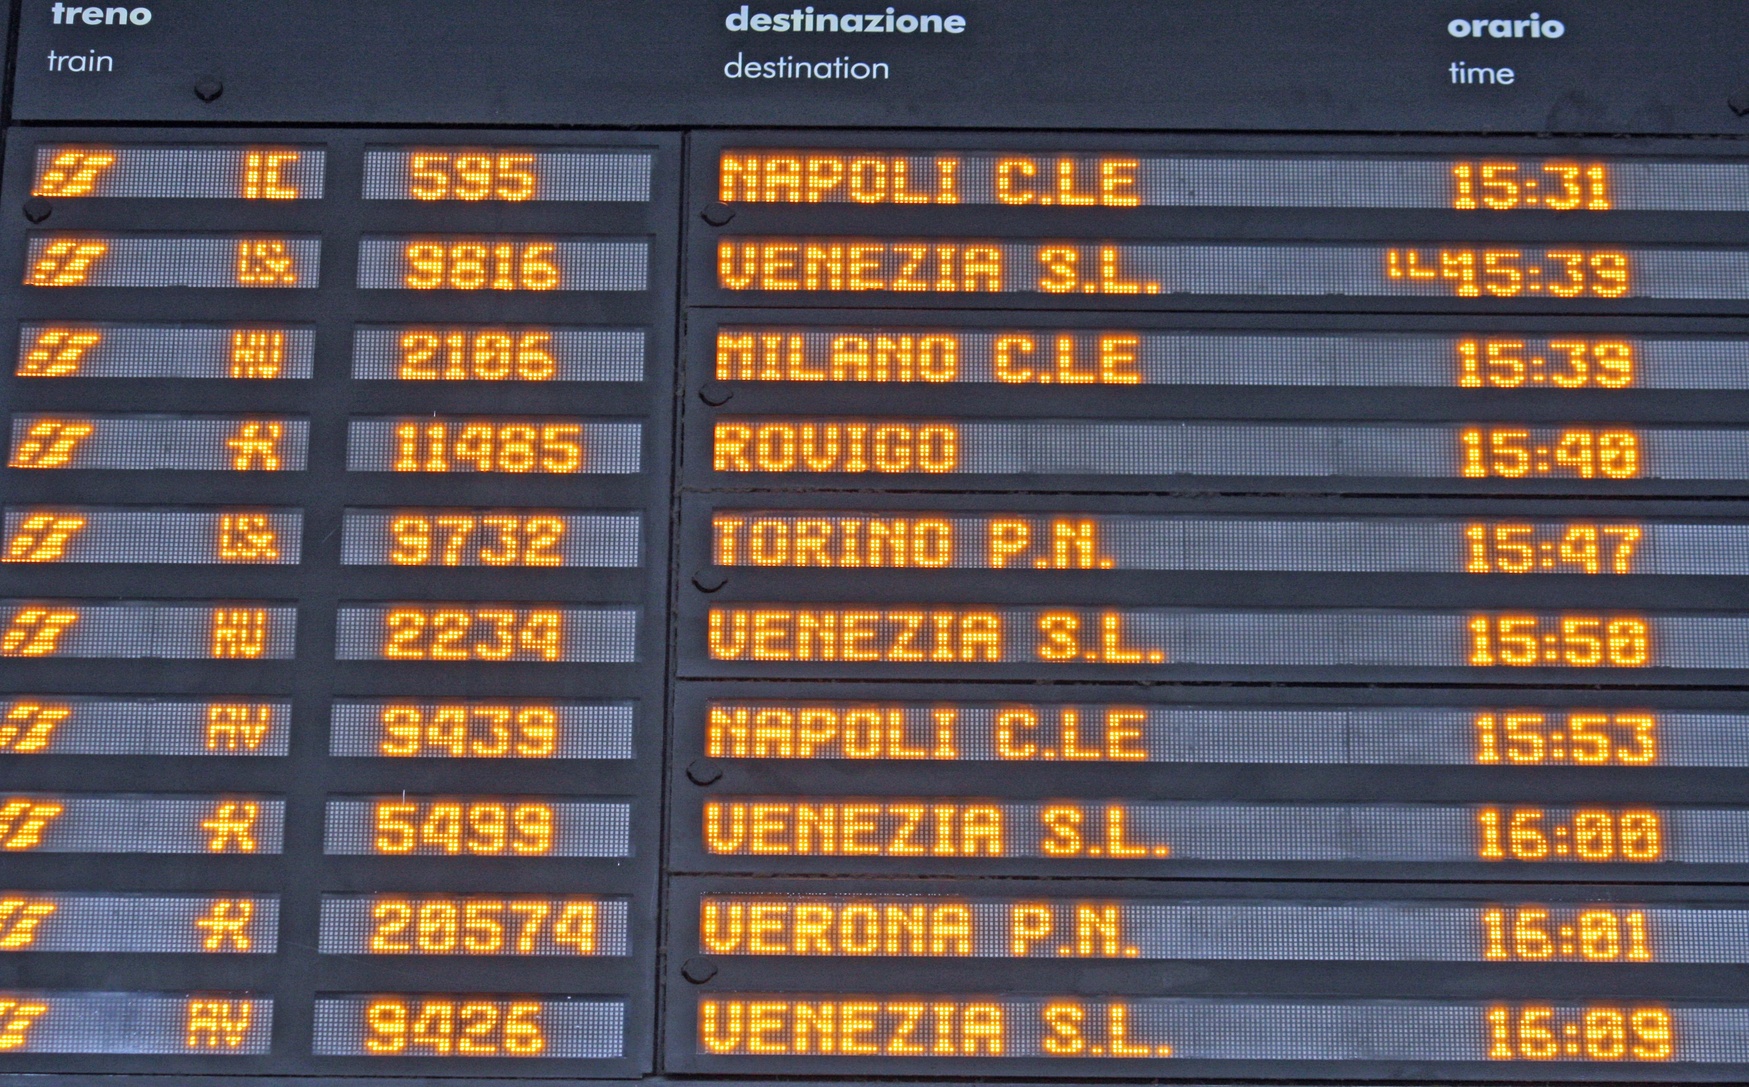 Five Tips to Make Your Train Travel Through Italy Easier and More Enjoyable